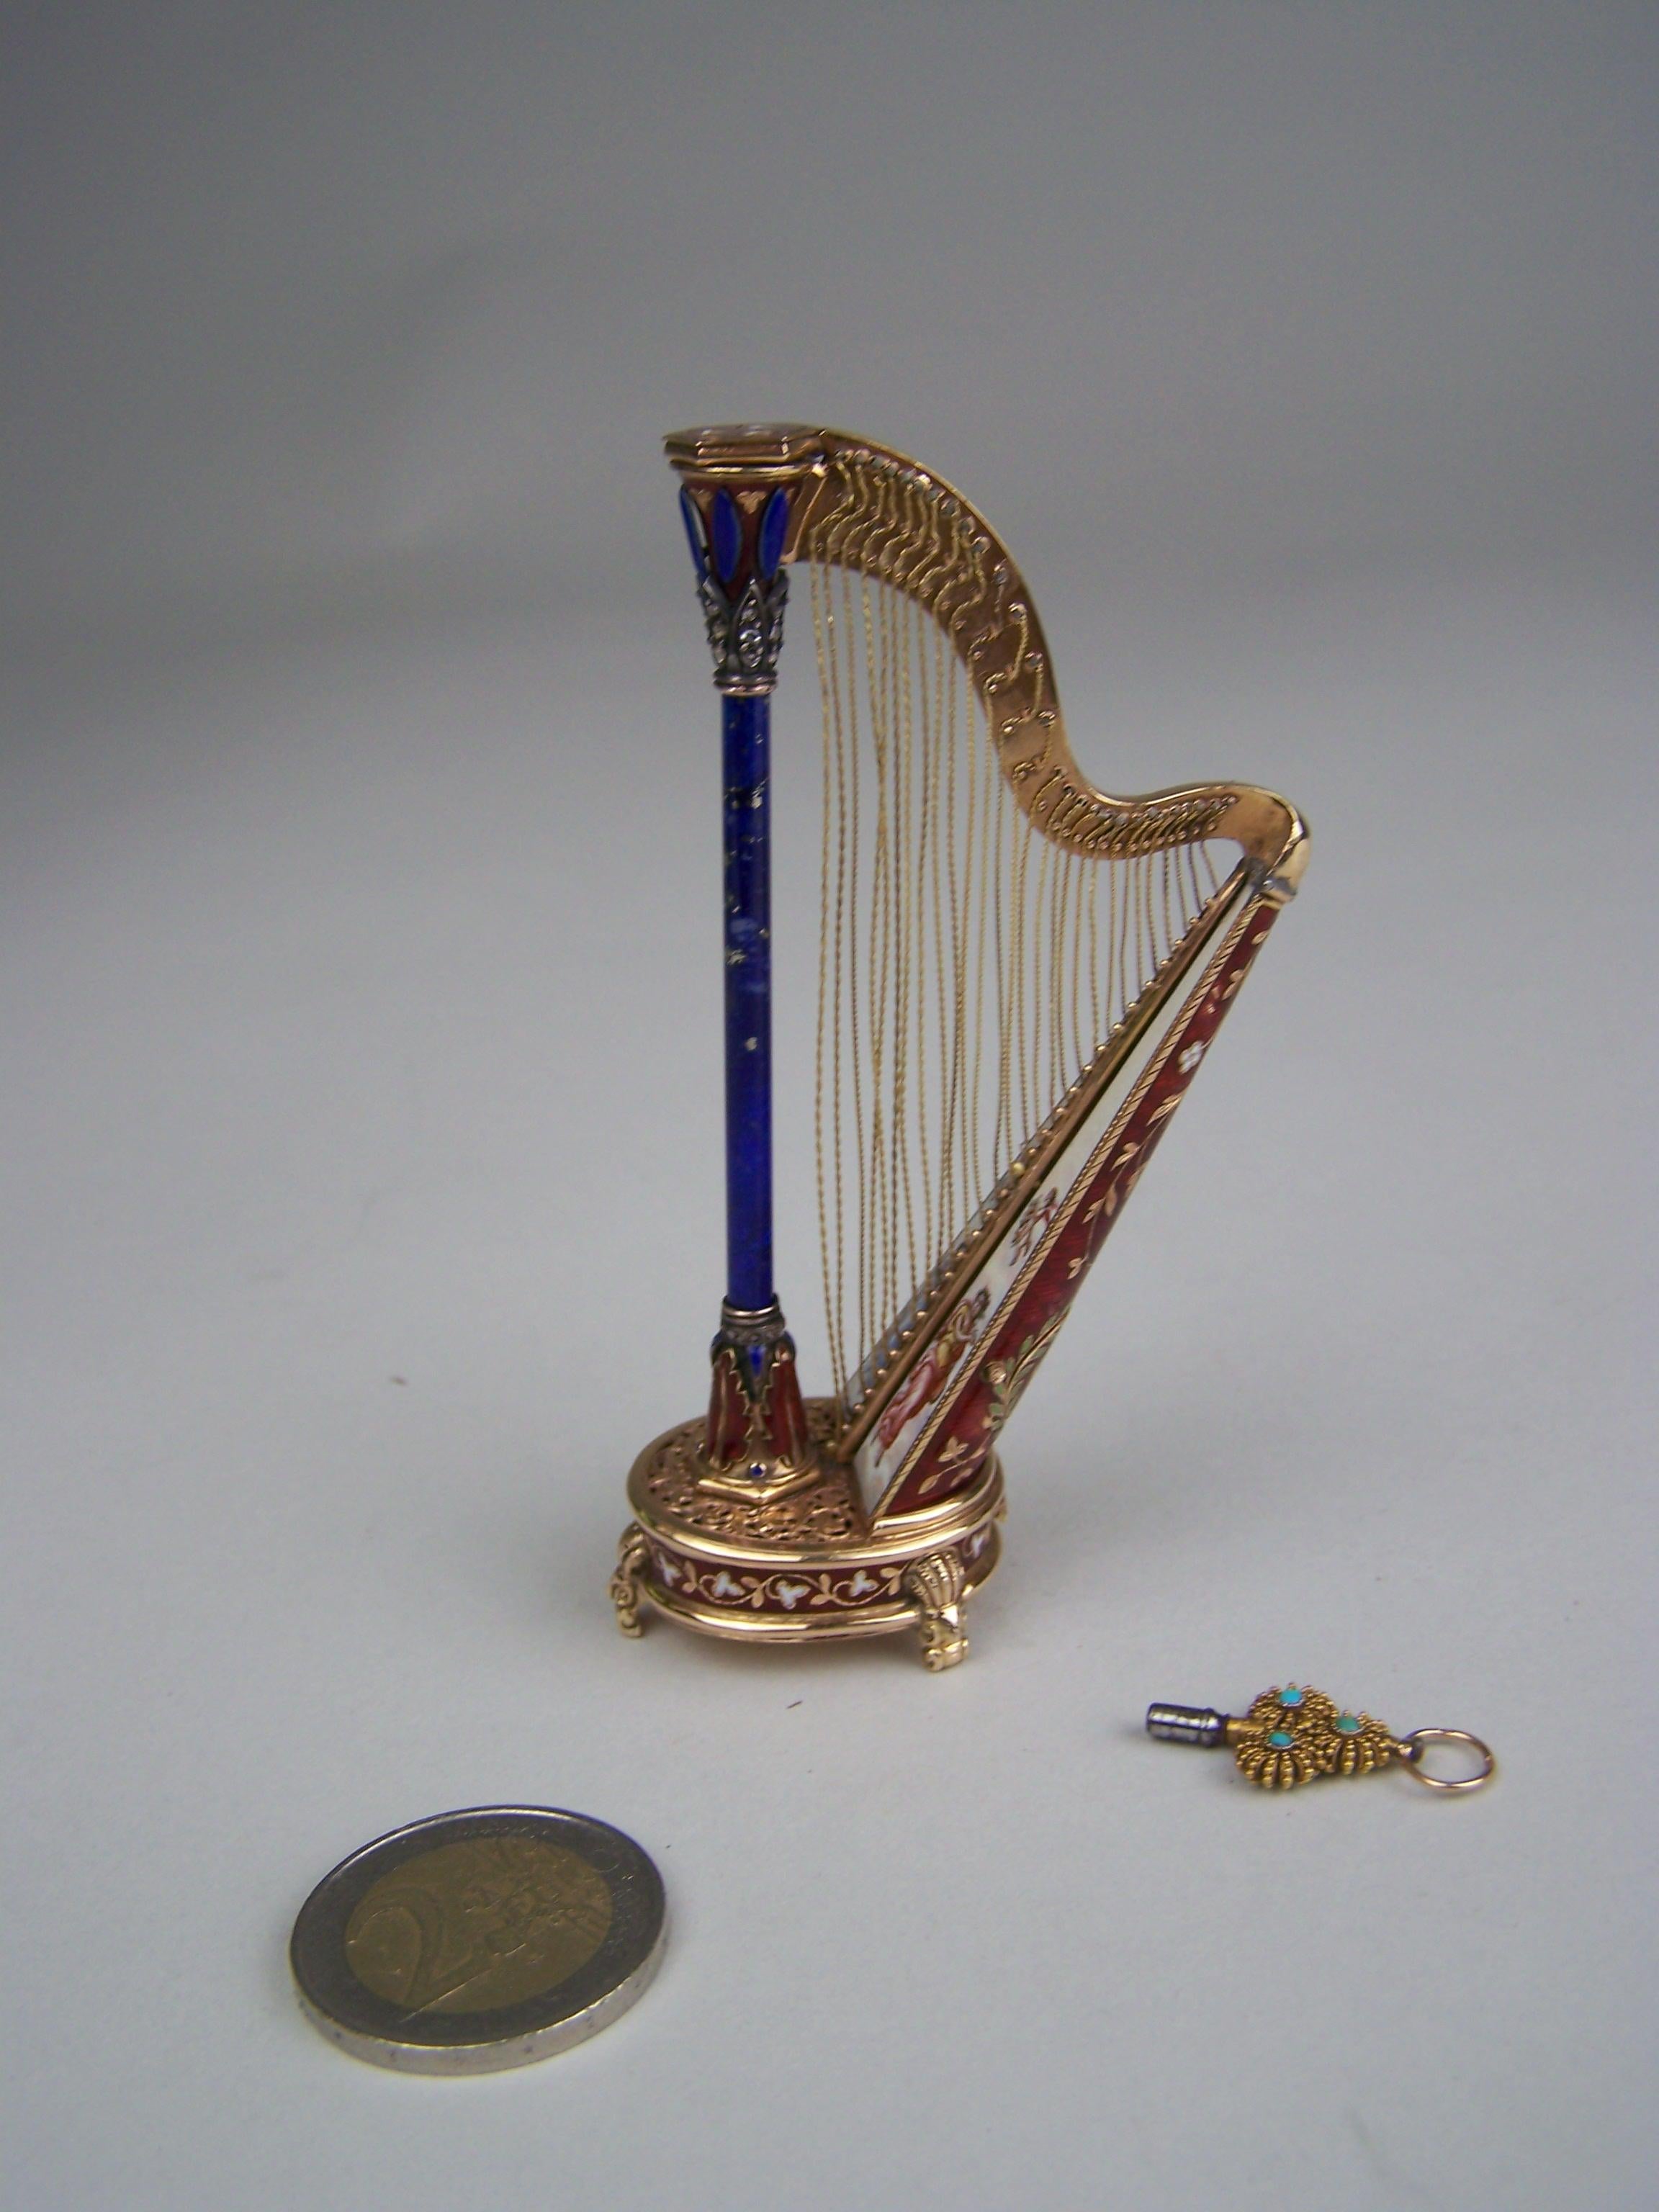 Very rare golden (14K) musical harp with barilet movement to the bottom.
case made by Köchert AE

Mechanism raised on 3 golden feed and having red transludent enamel to the side. Champleve with white leaves. The top of the musical case finished with